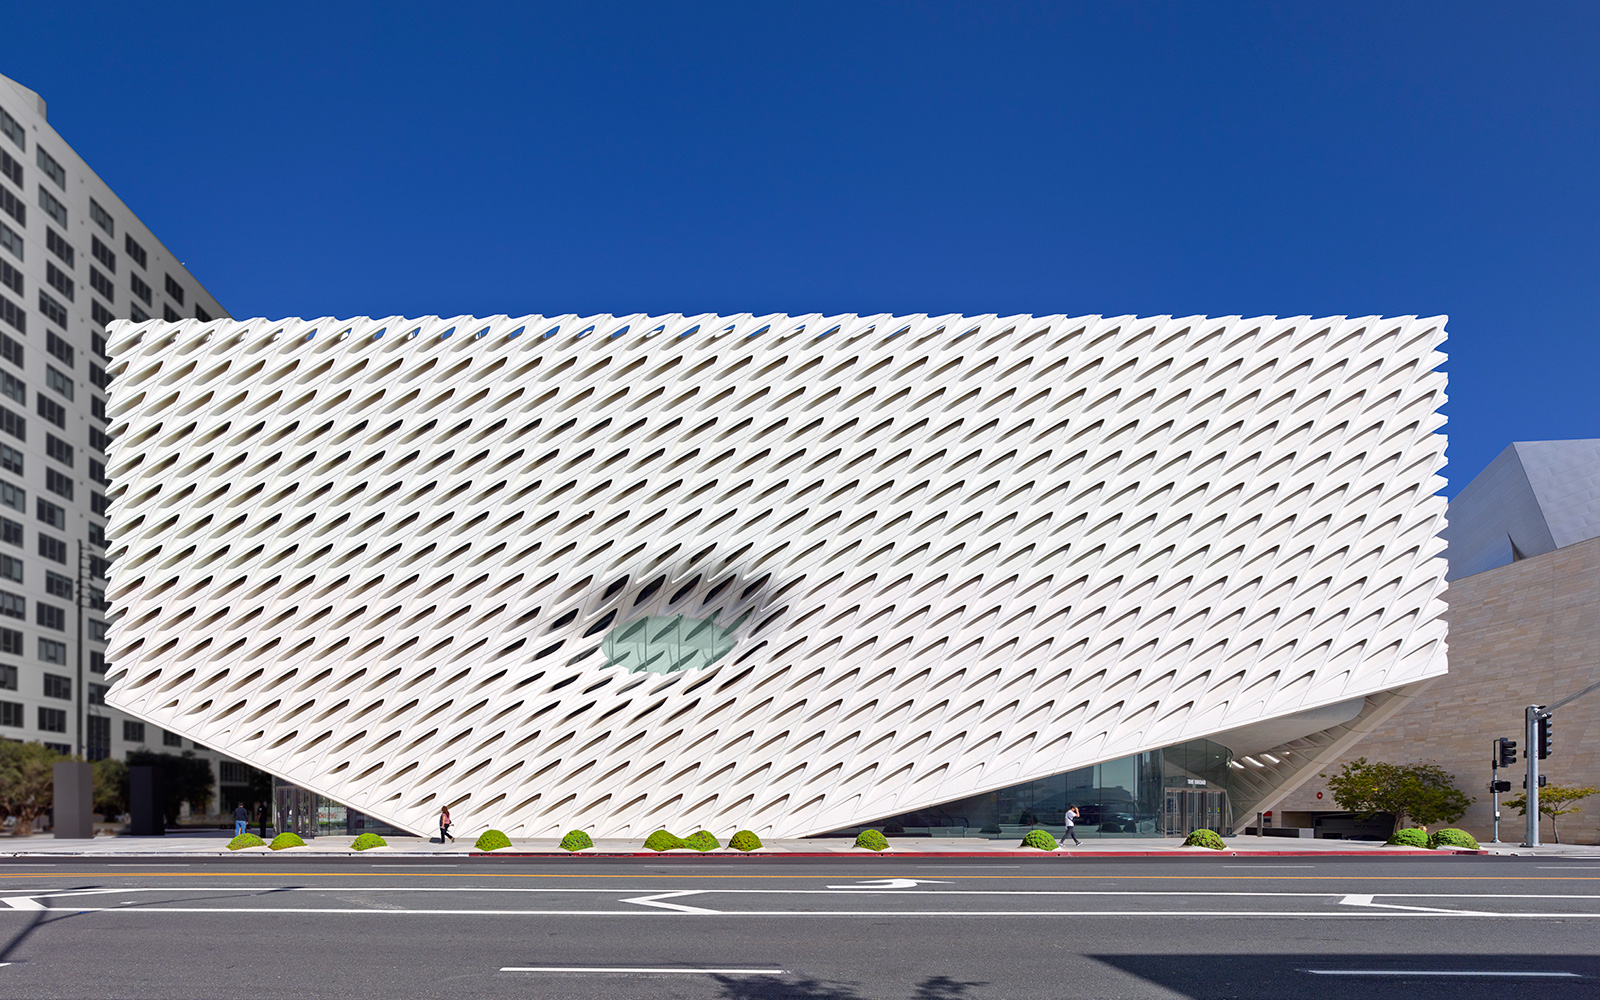 L.A.'s New Broad Museum Will Have an Audio Tour by LeVar Burton